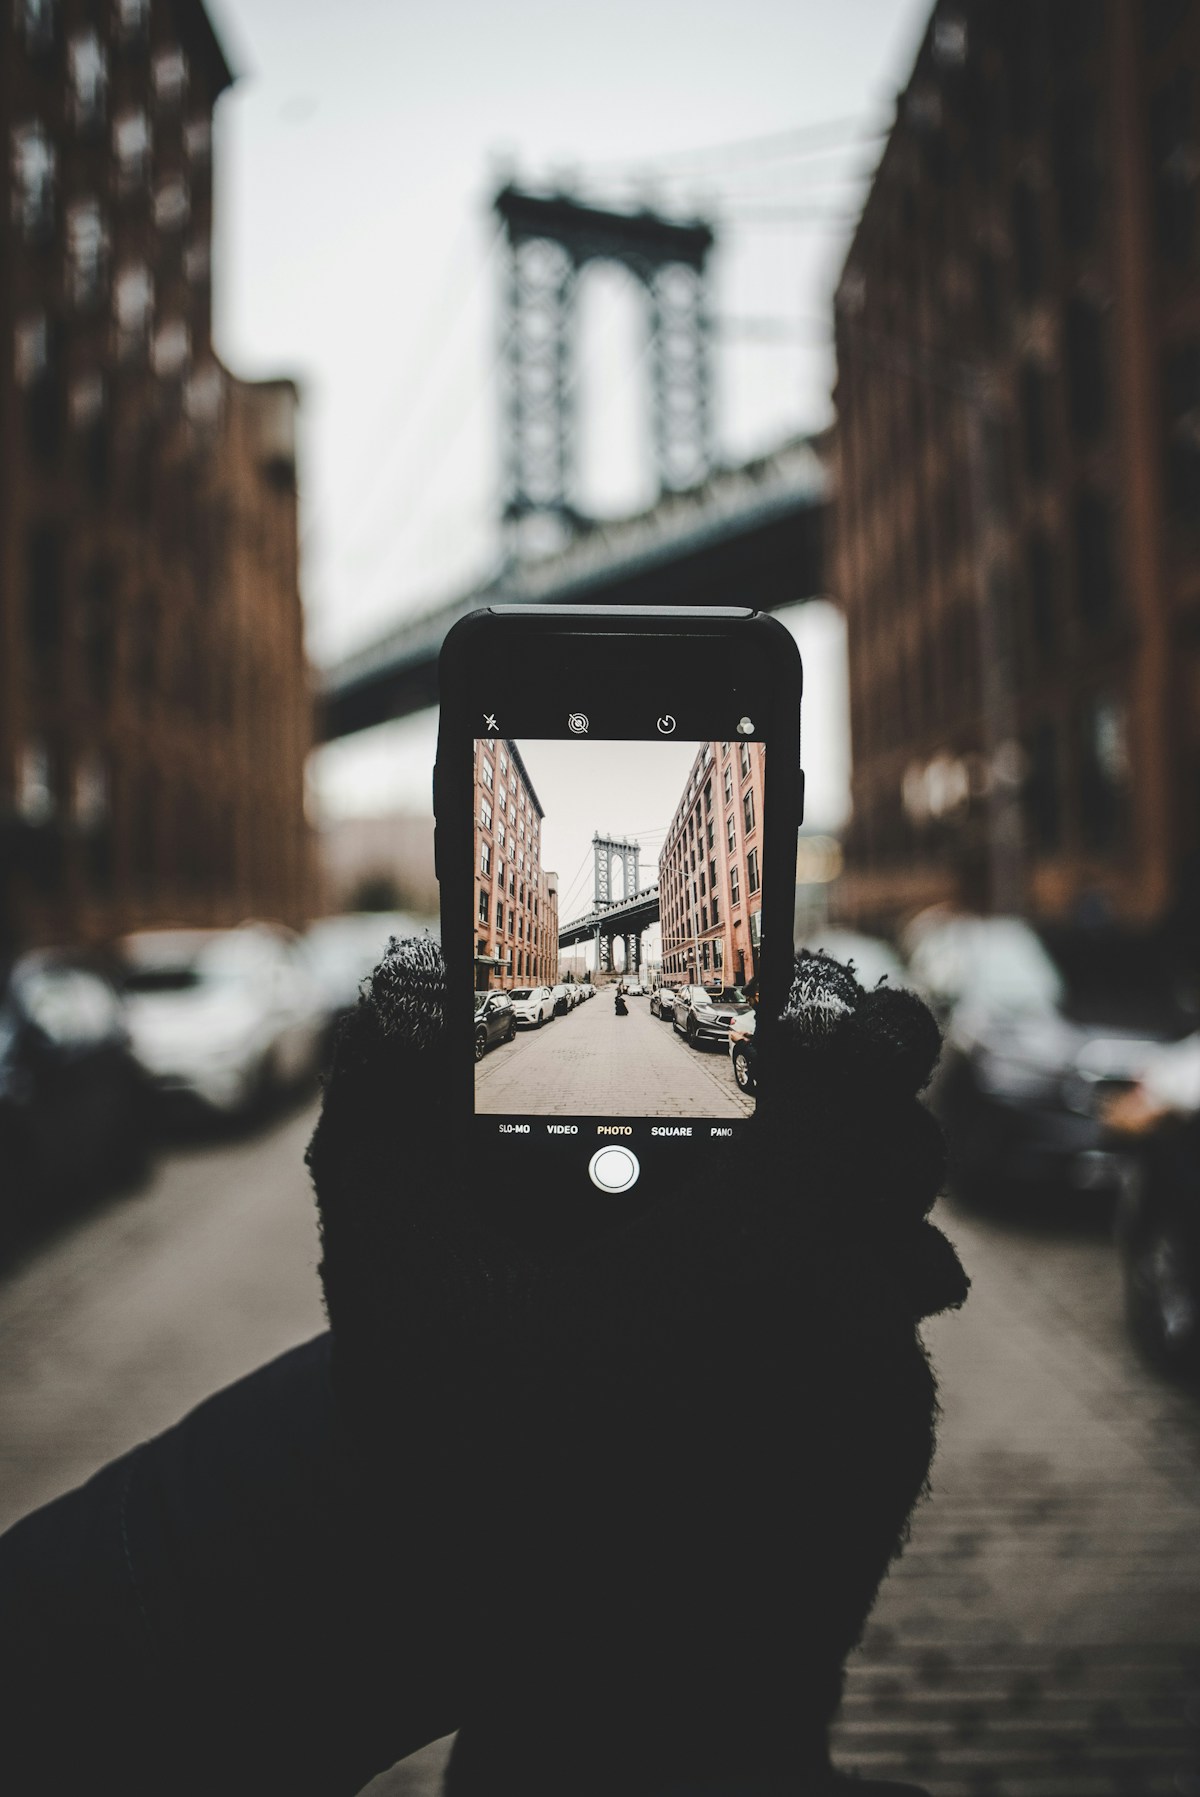 Editing And Enhancing Images On The Go With Mobile Apps For Photographers